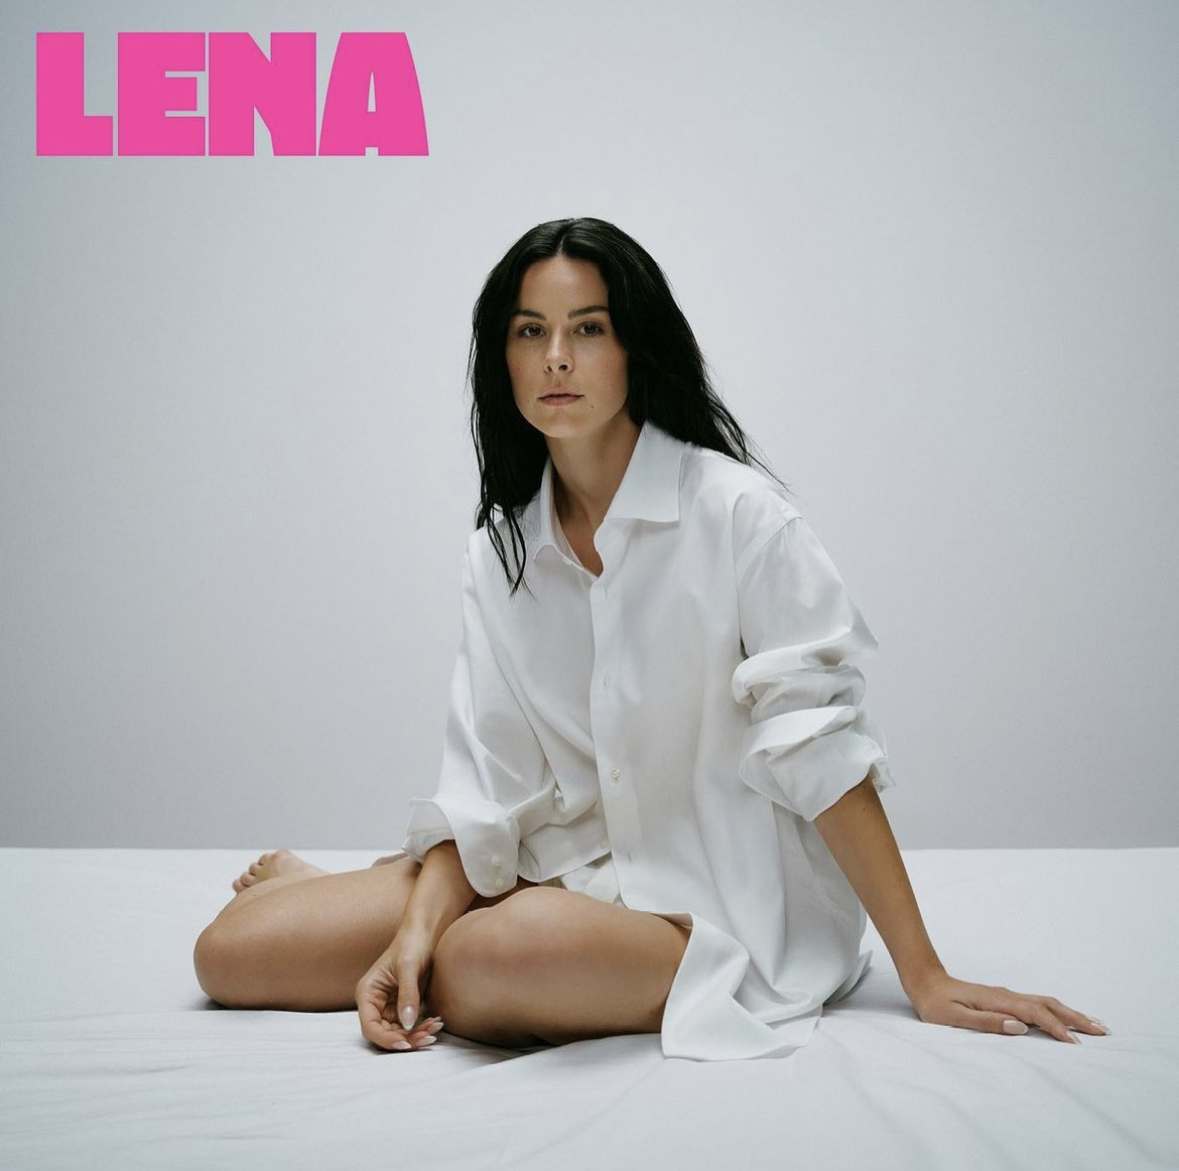 Lena — What I Want cover artwork